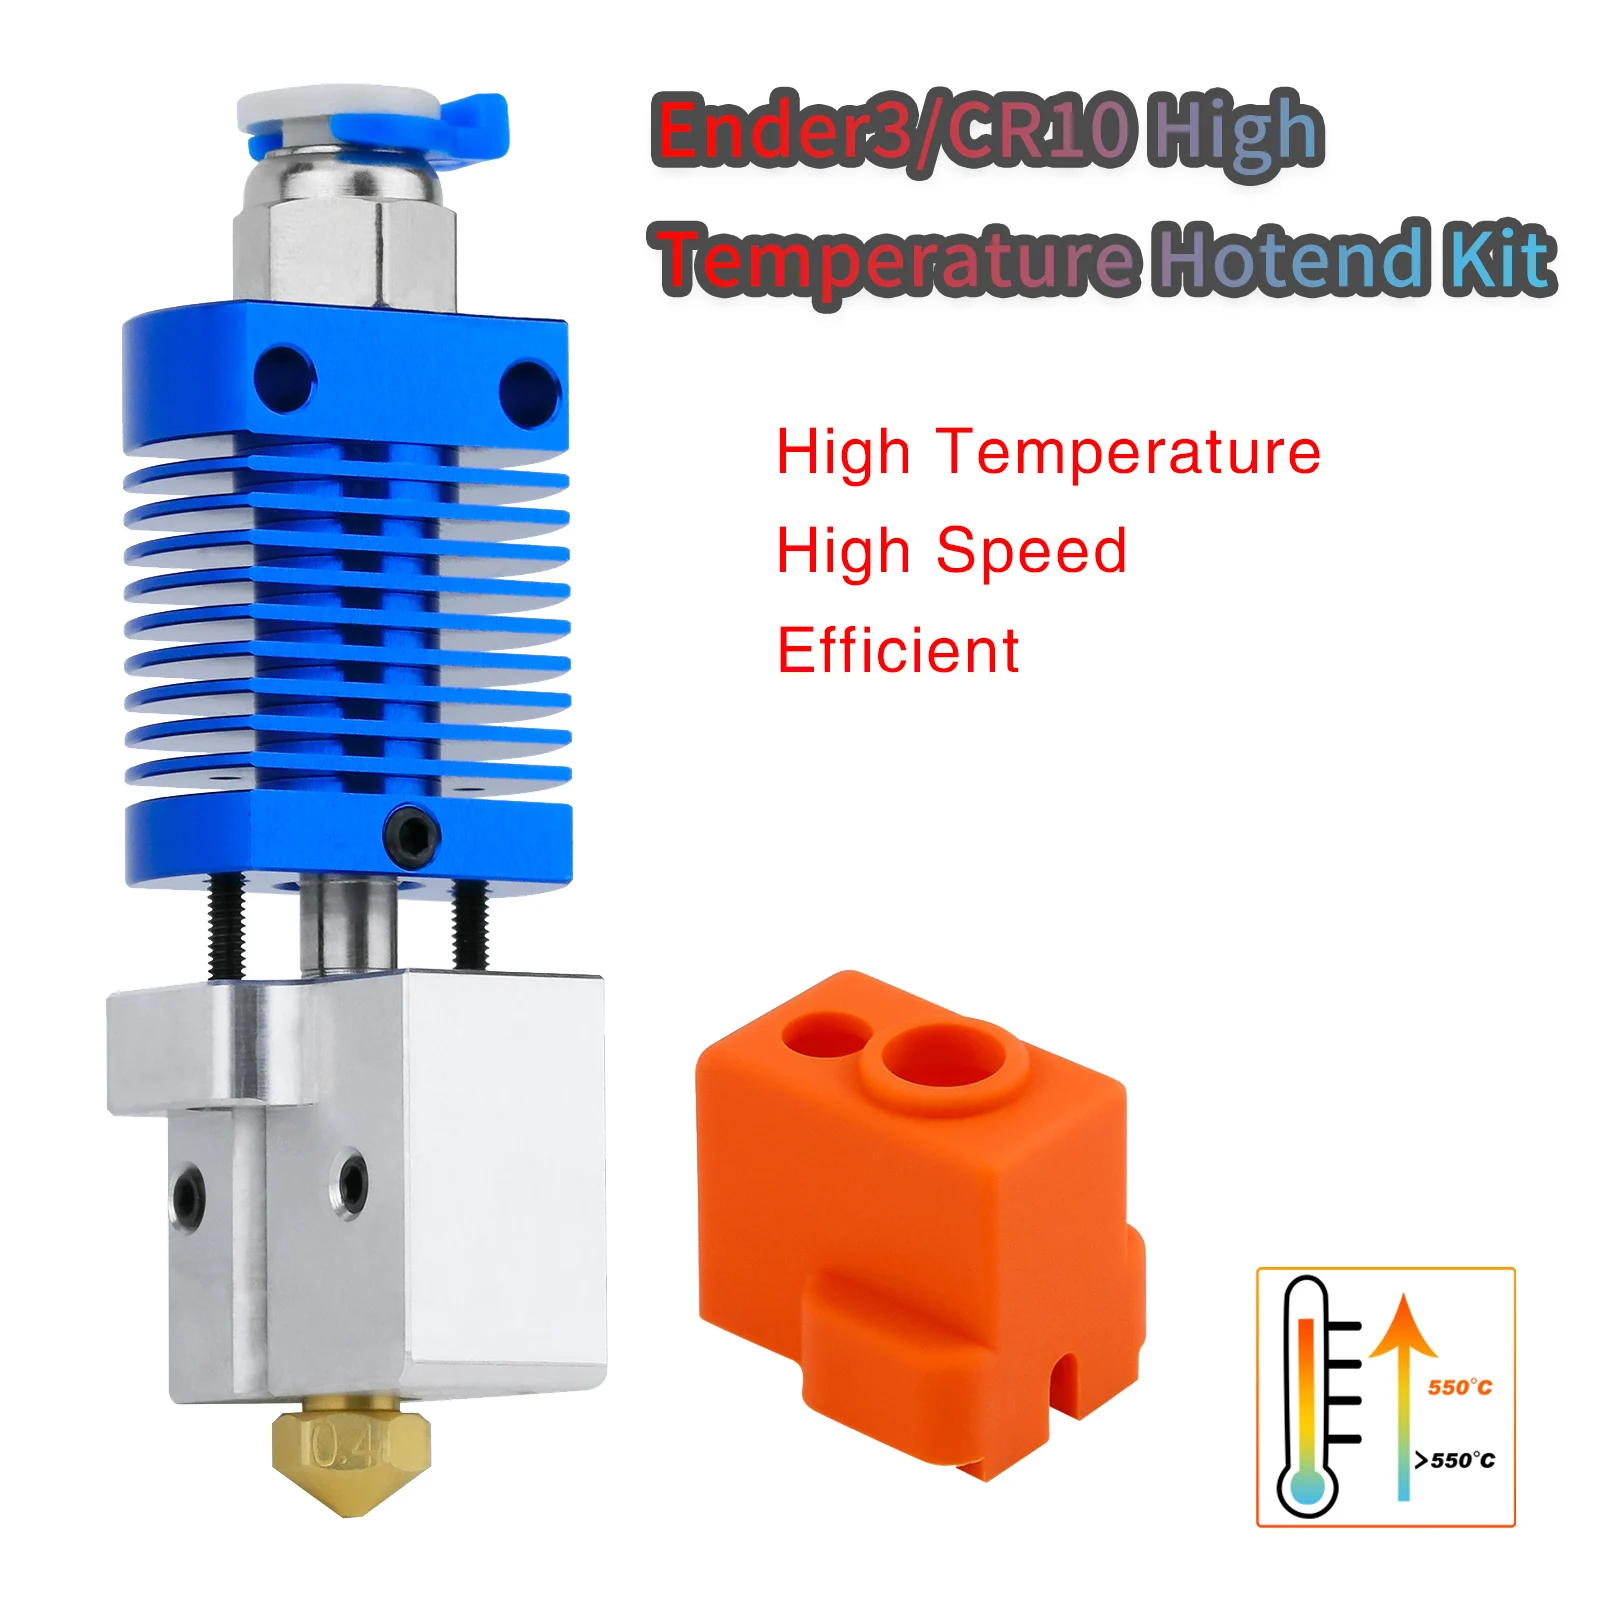 High Temperature Ender3/CR10  Hotend Kit Reach To 550℃ Copper Plated Nozzle Heating Block For Ender-3/Pro/ V2/Ender5/CR10/10S